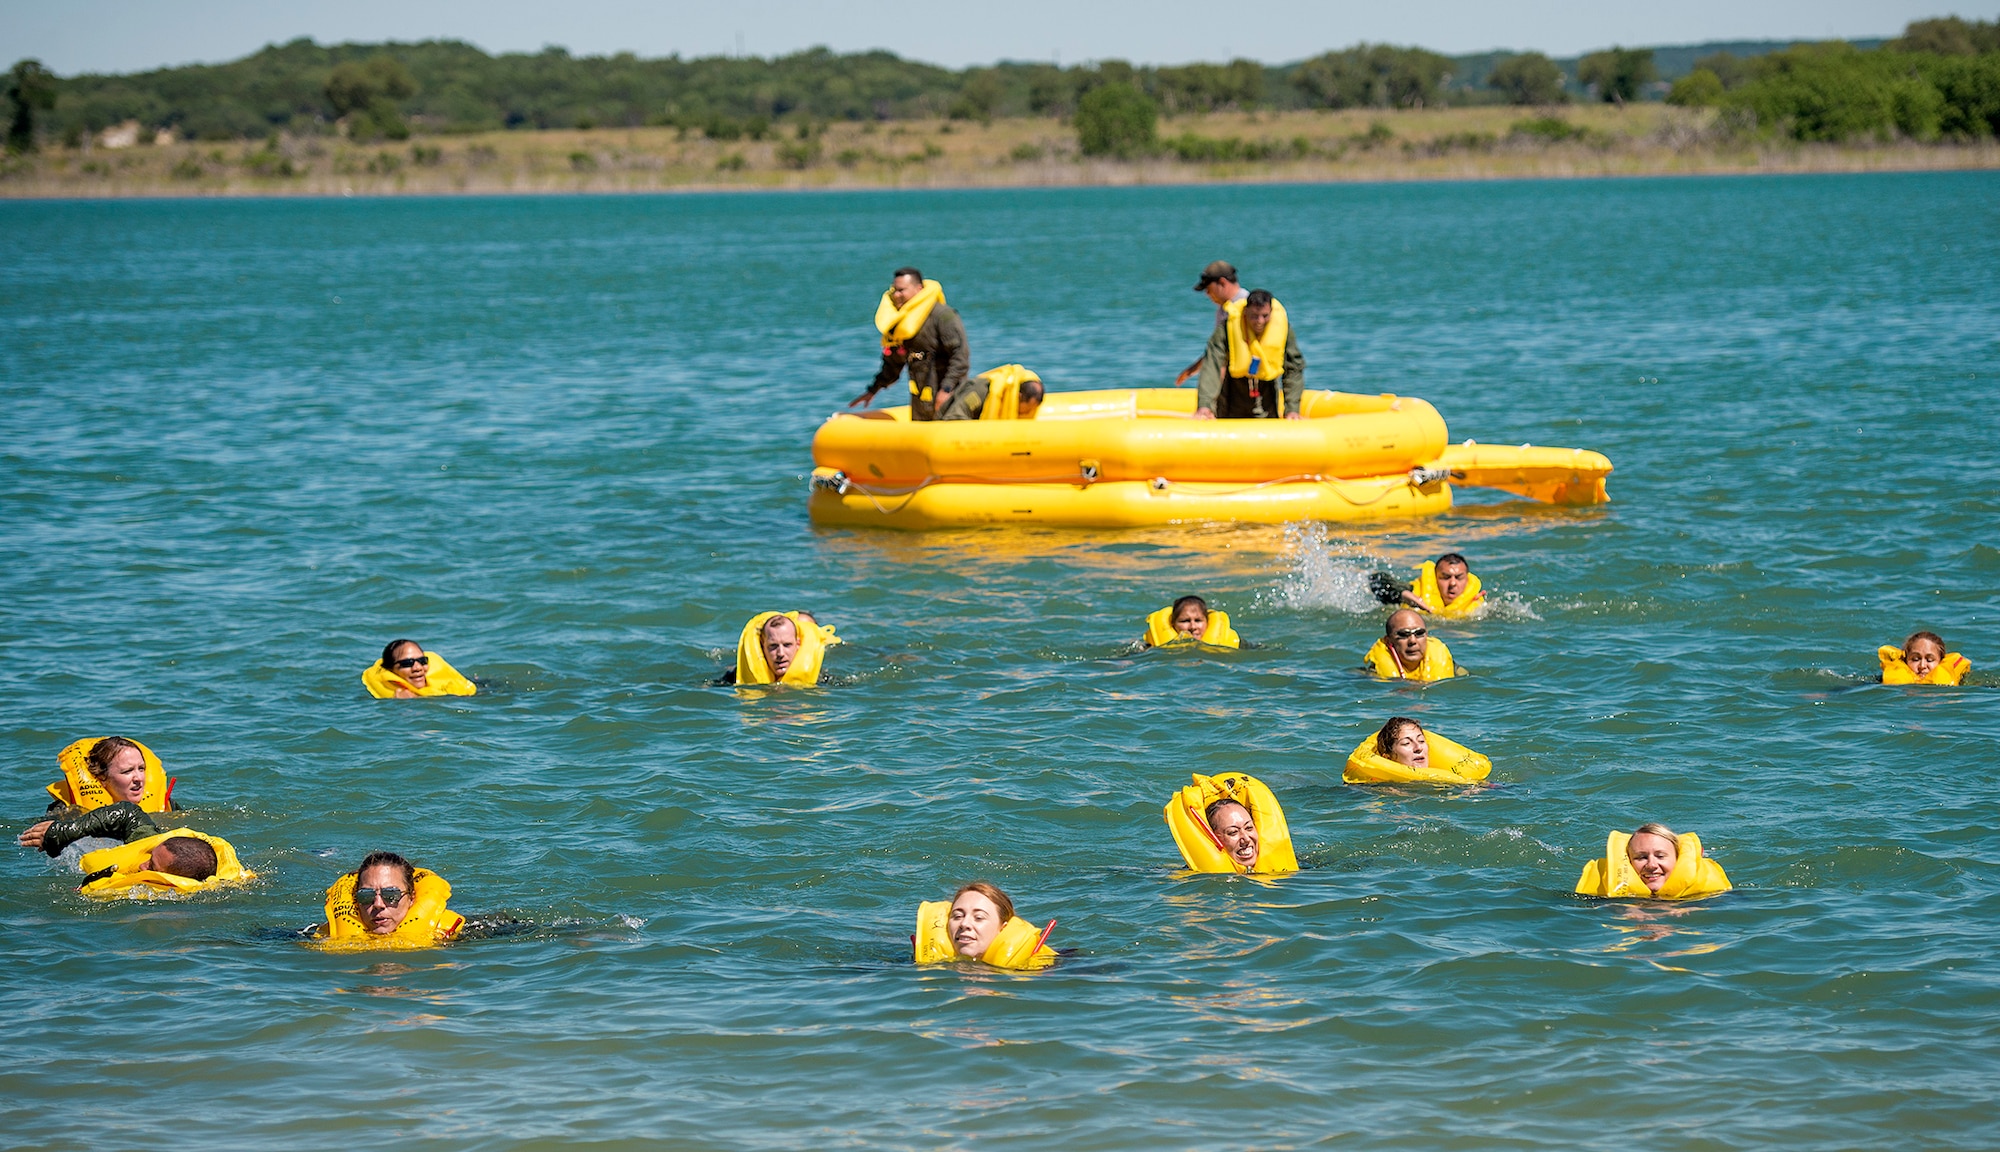 Airmen from the 433rd Aeromedical Evacuation Squadron exit the 25-man life raft and swim to shore during water survival training May 5, 2017 at Joint Base San Antonio-Canyon Lake. The triannual training is a requirement for all aircrew Air Force Specialty Codes and includes open water swimming and life raft training. (U.S. Air Force photo by Benjamin Faske)